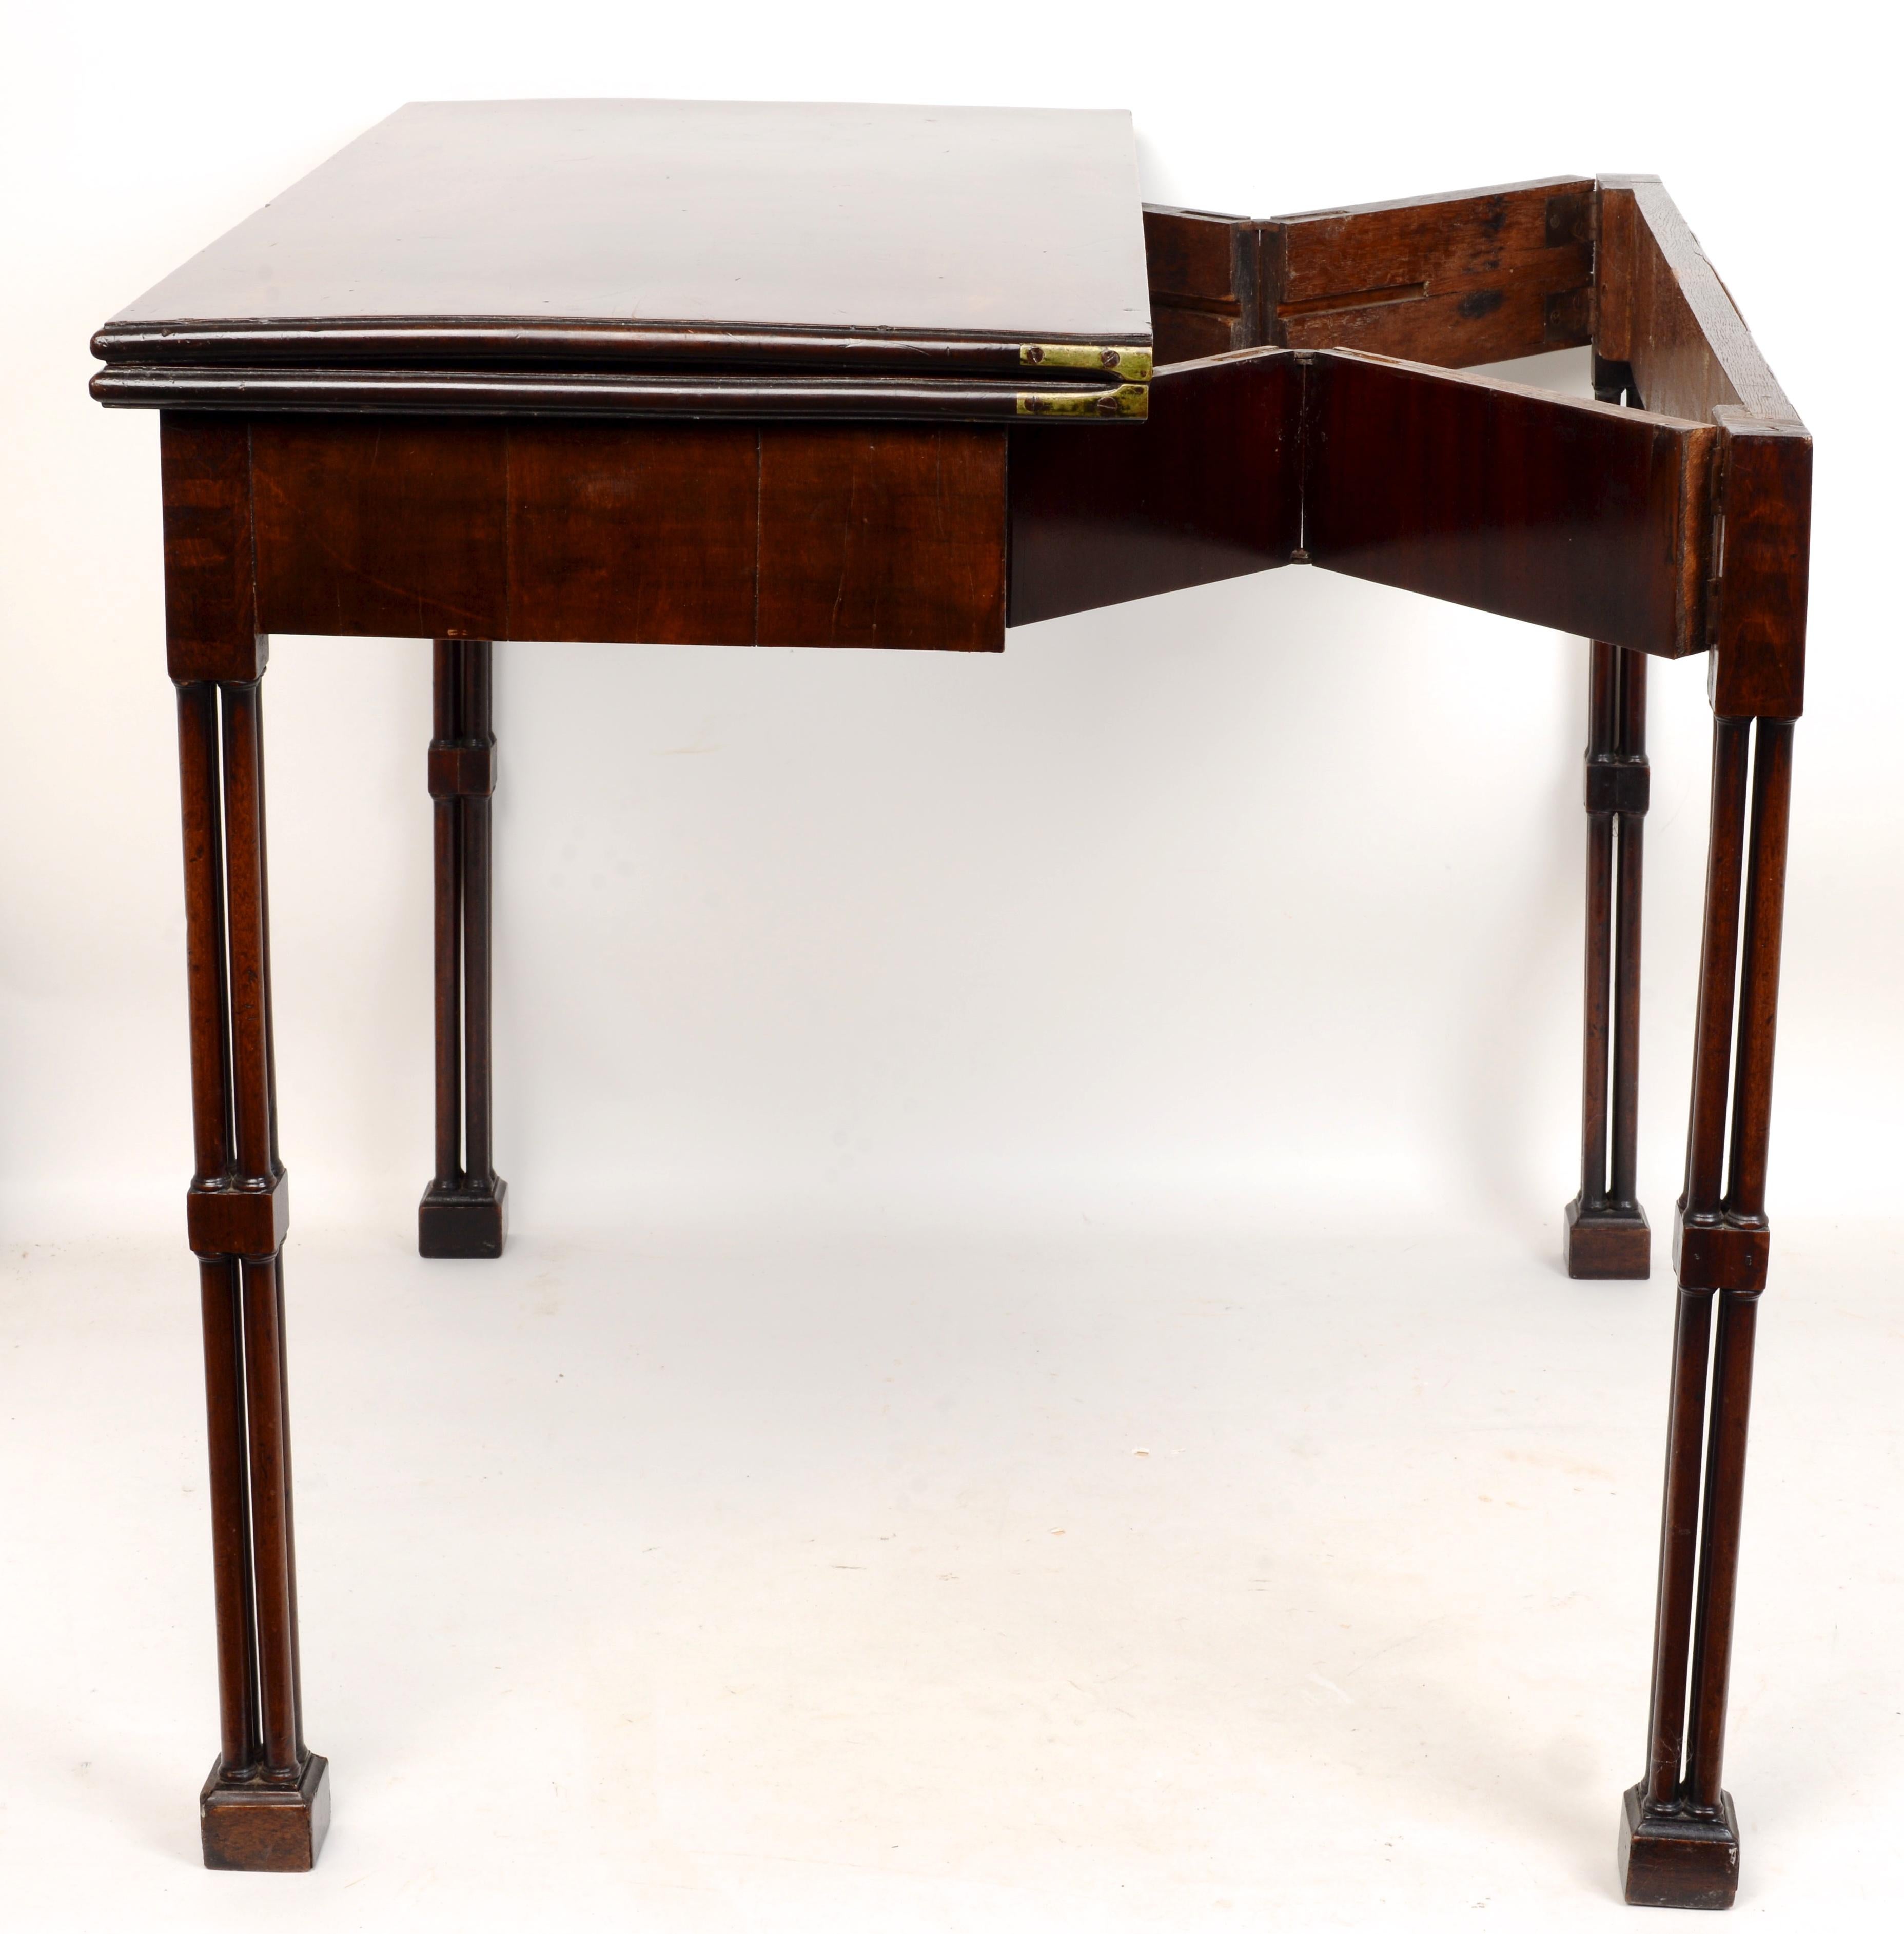 Geo III Mahogany Fold-Over Card Table with Cluster-Leg & Concertina Action c1780 For Sale 1